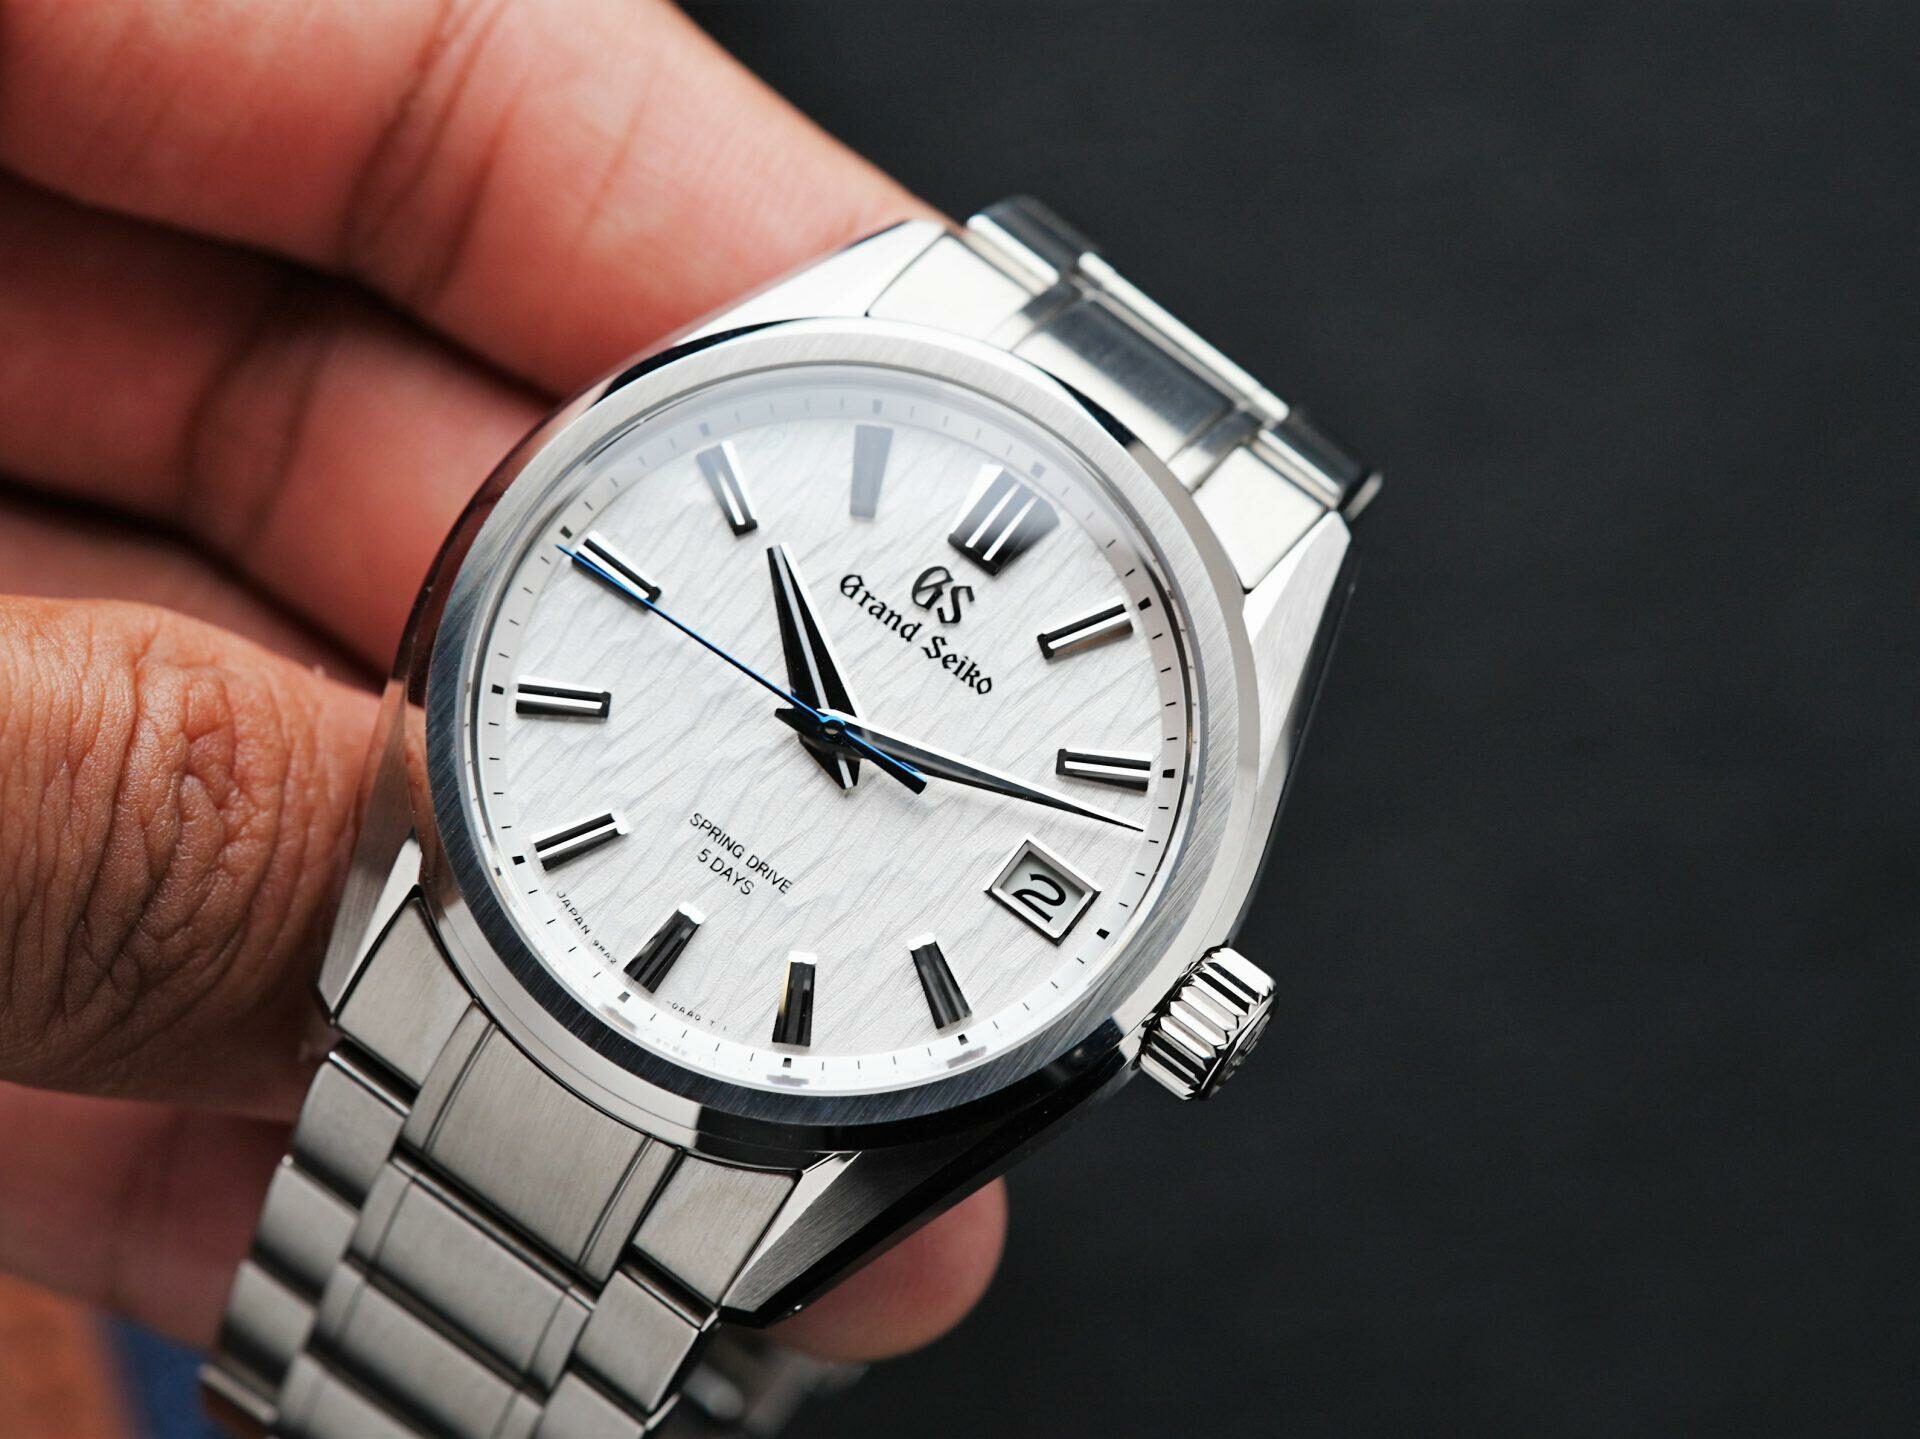 Grand Seiko Heritage Collection White Birch being held in hand.